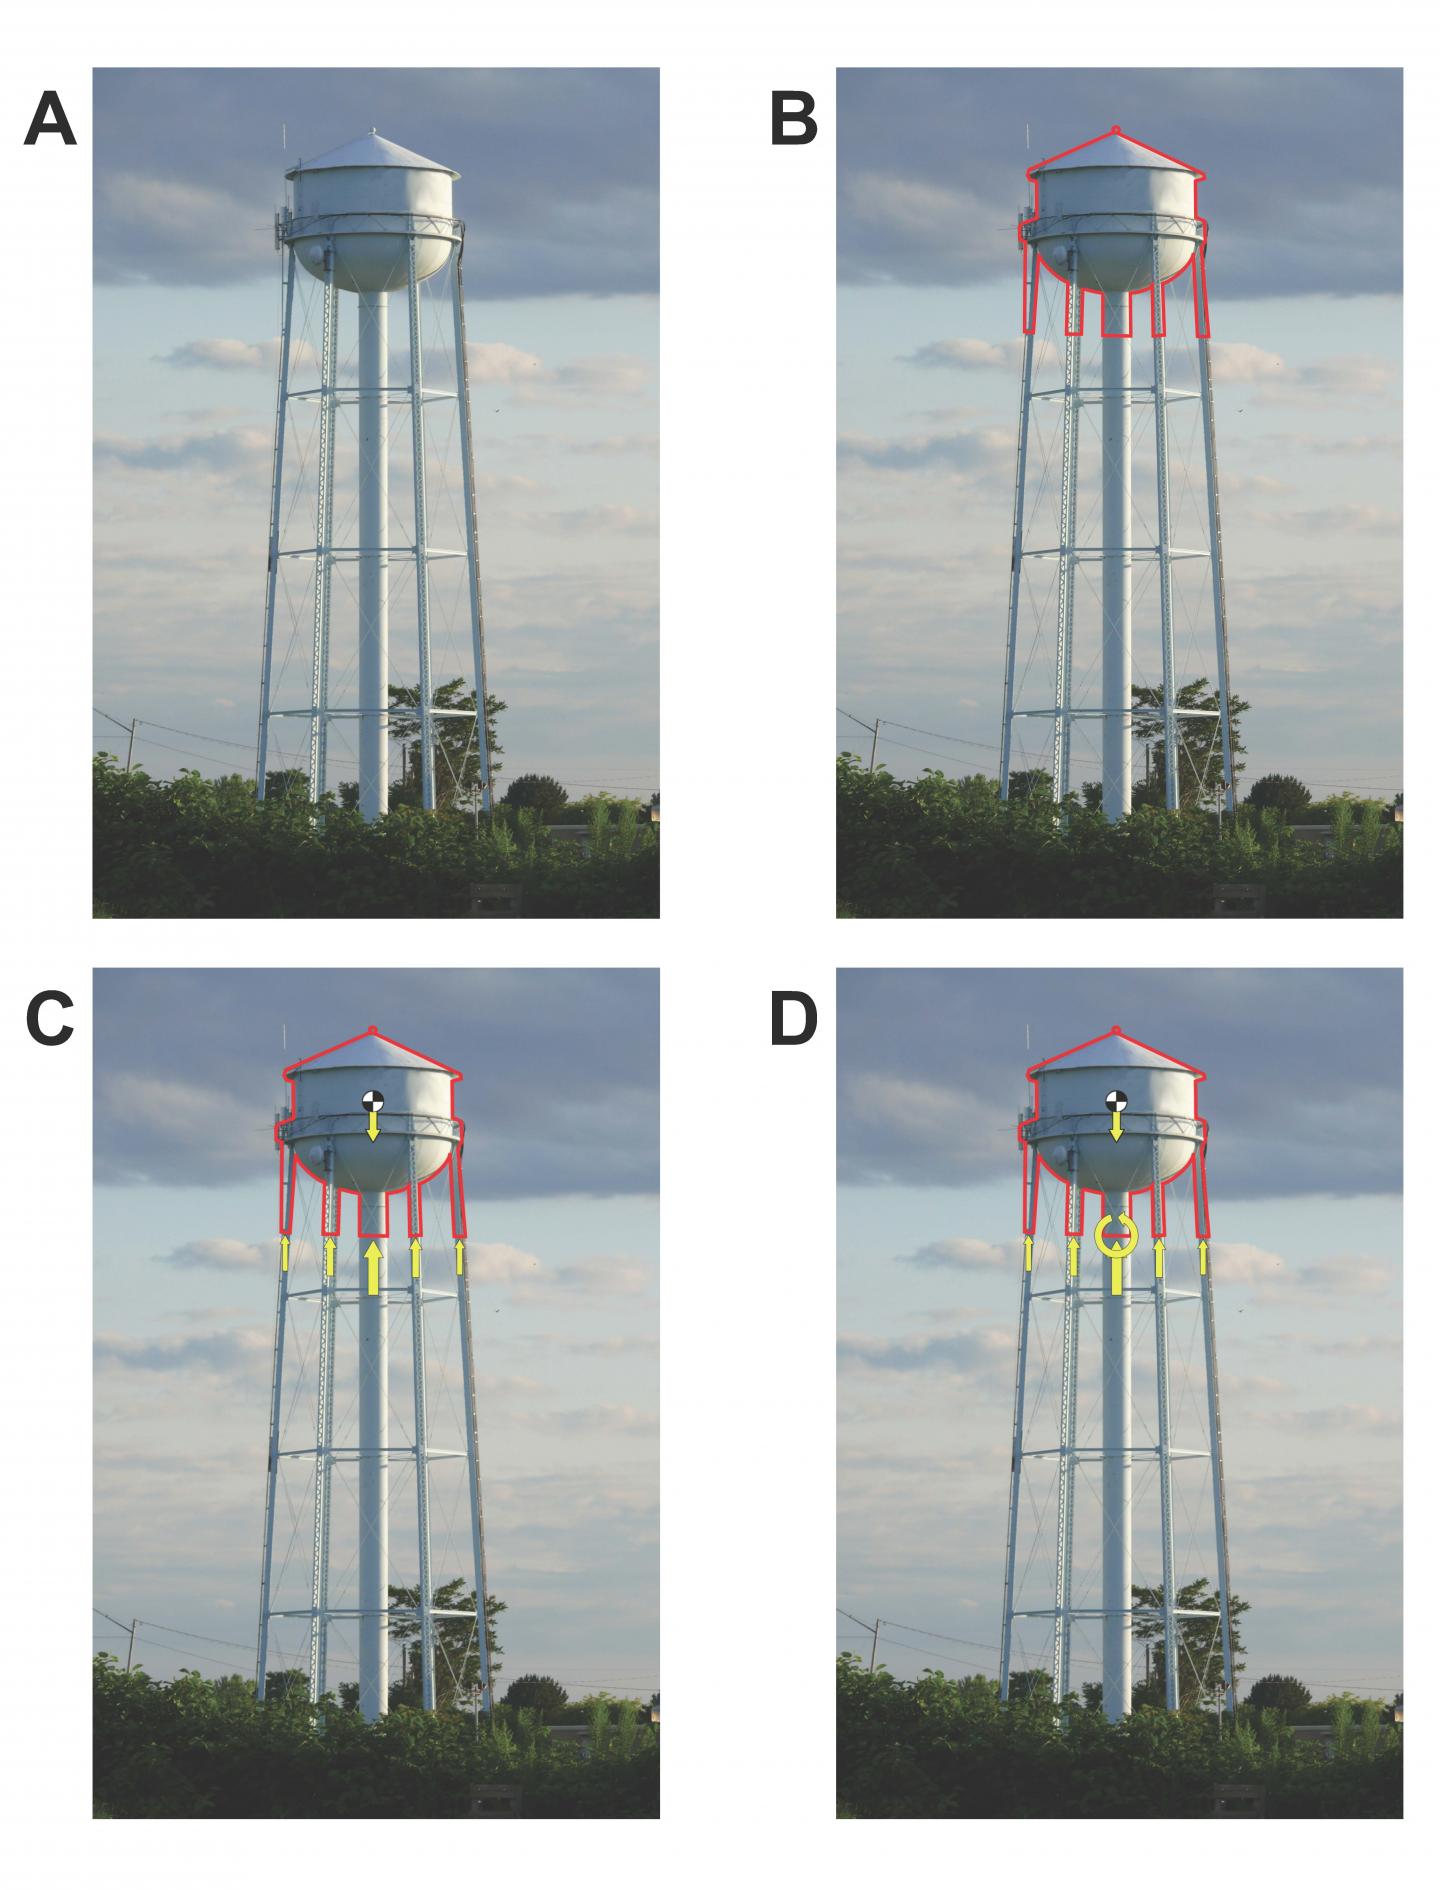 Diagram of How Forces Affect a Water Tower.